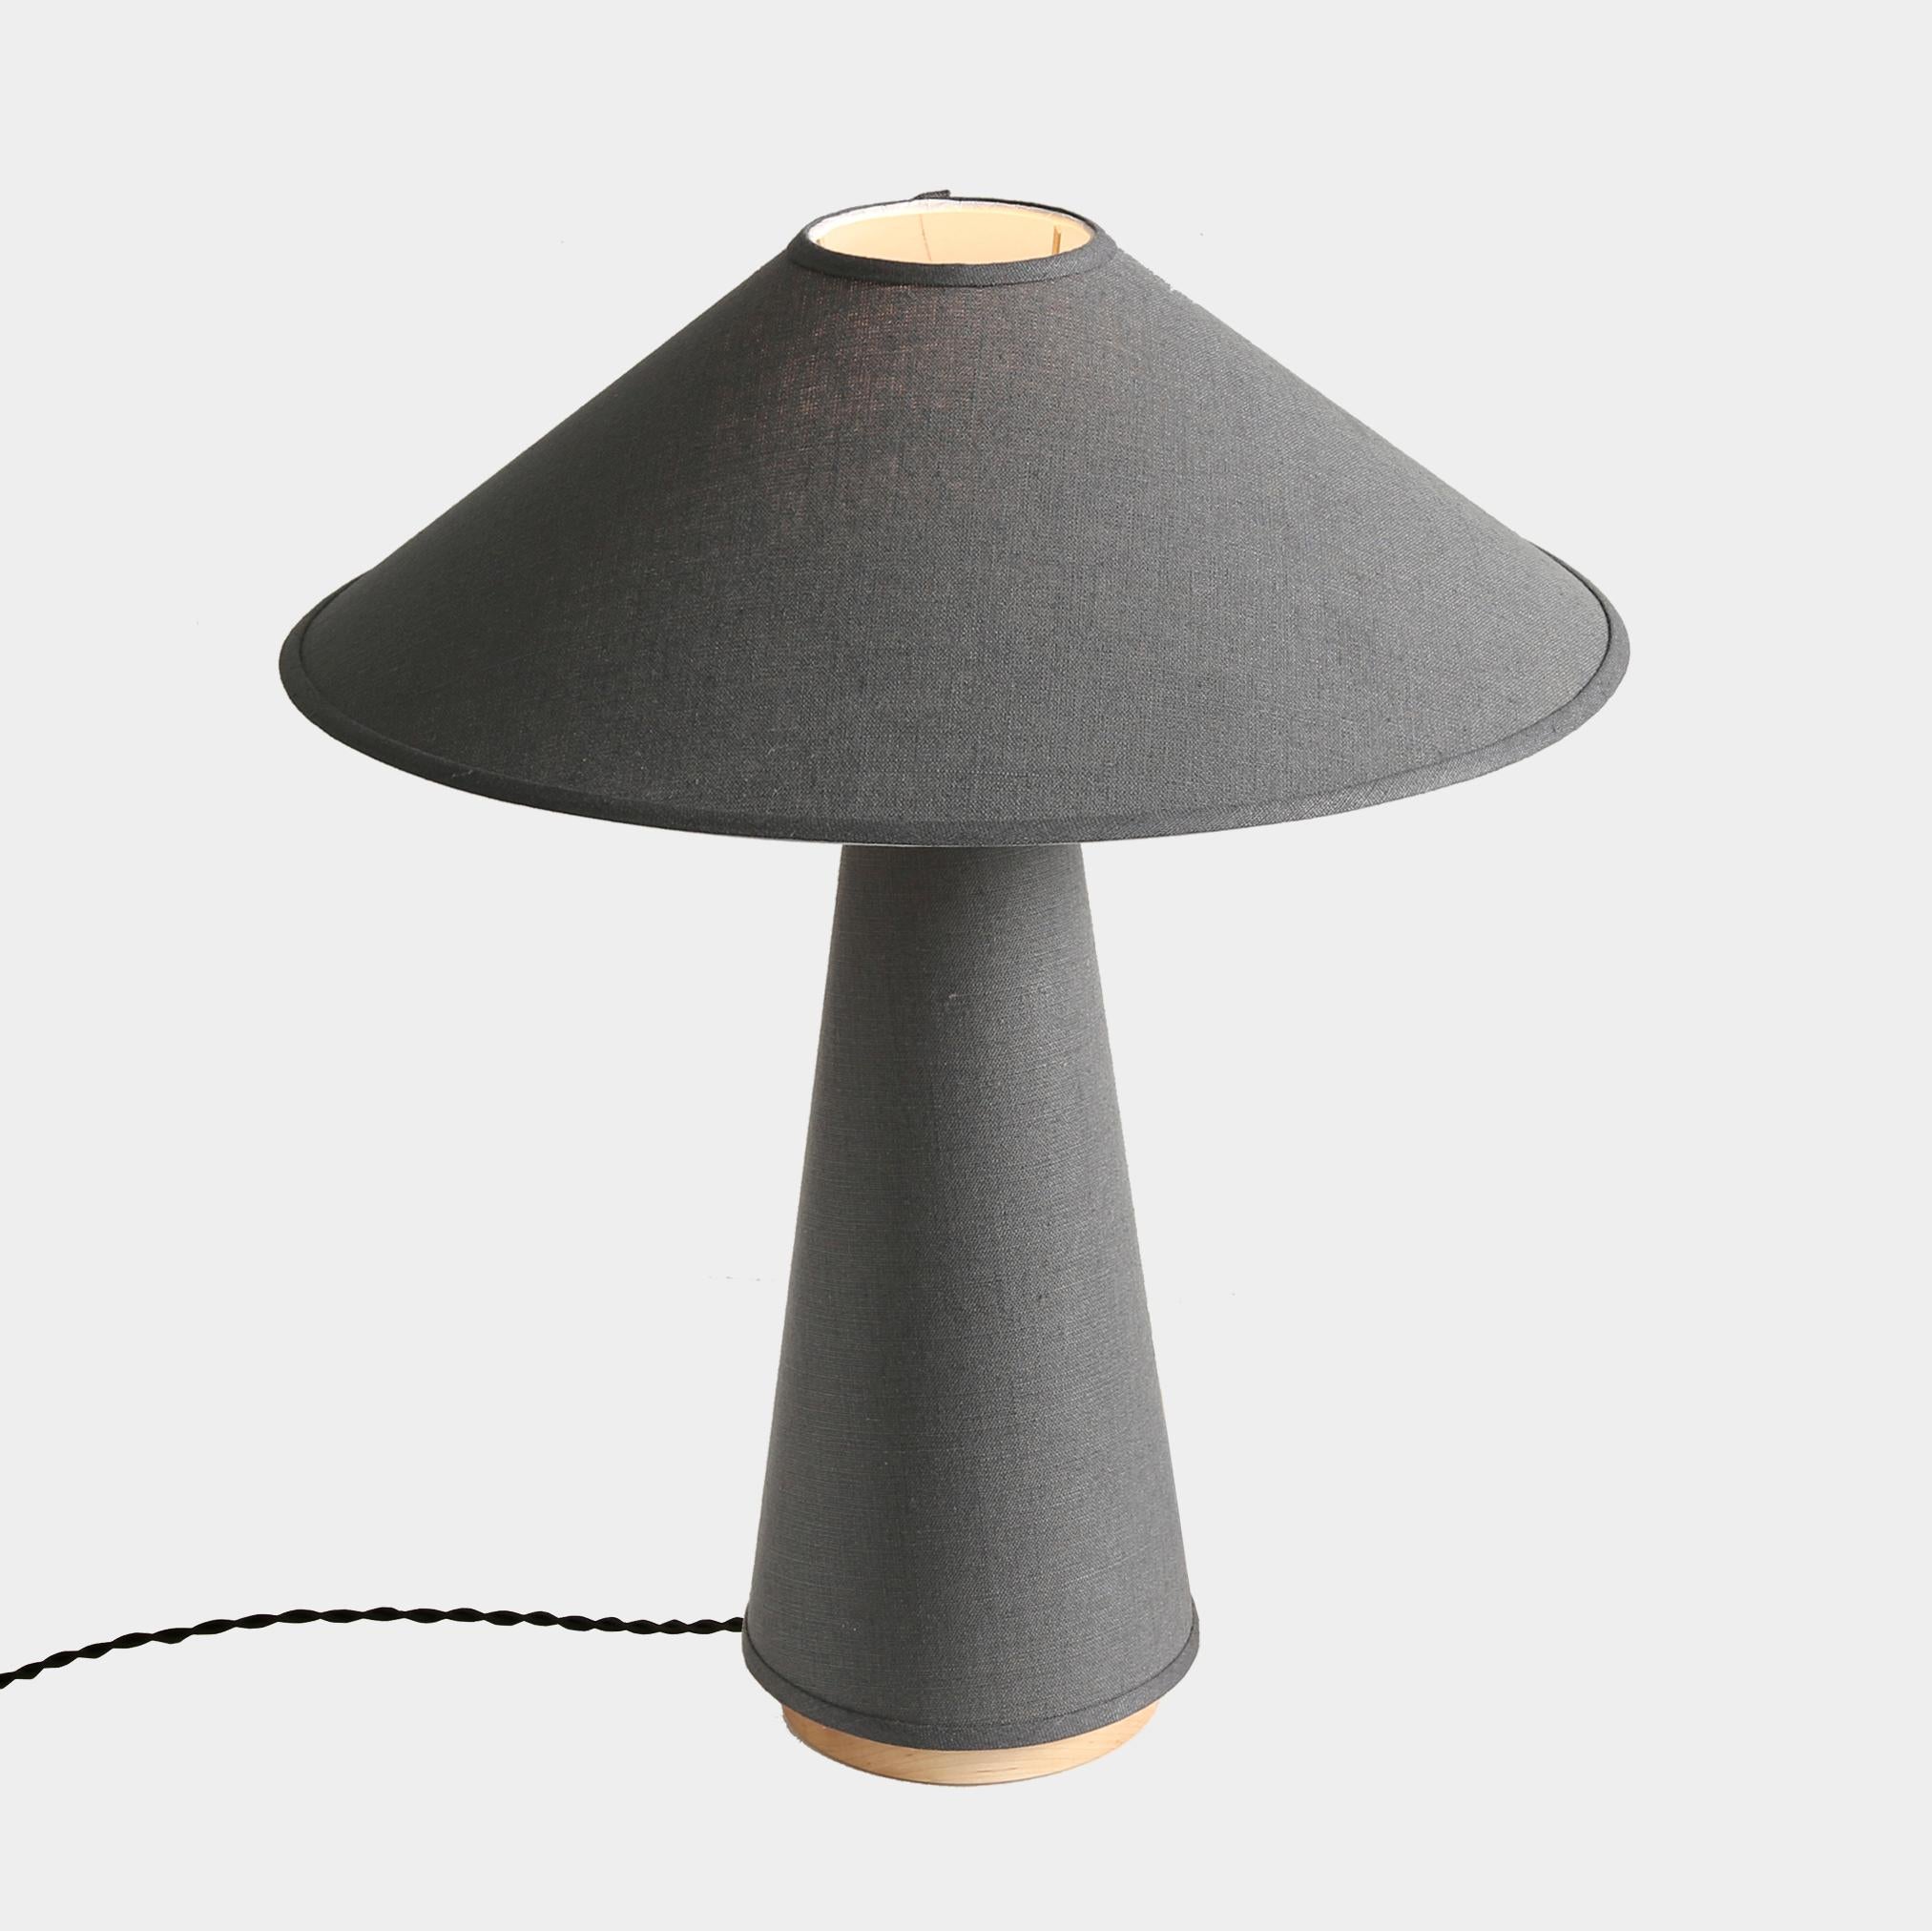 The Linden table lamp features a charcoal grey linen shade and lamp body, solid hardwood maple base, and brass details. The tabletop fixture references the classic profiles and angles of mid-century modern design with distinct clean lines, smooth